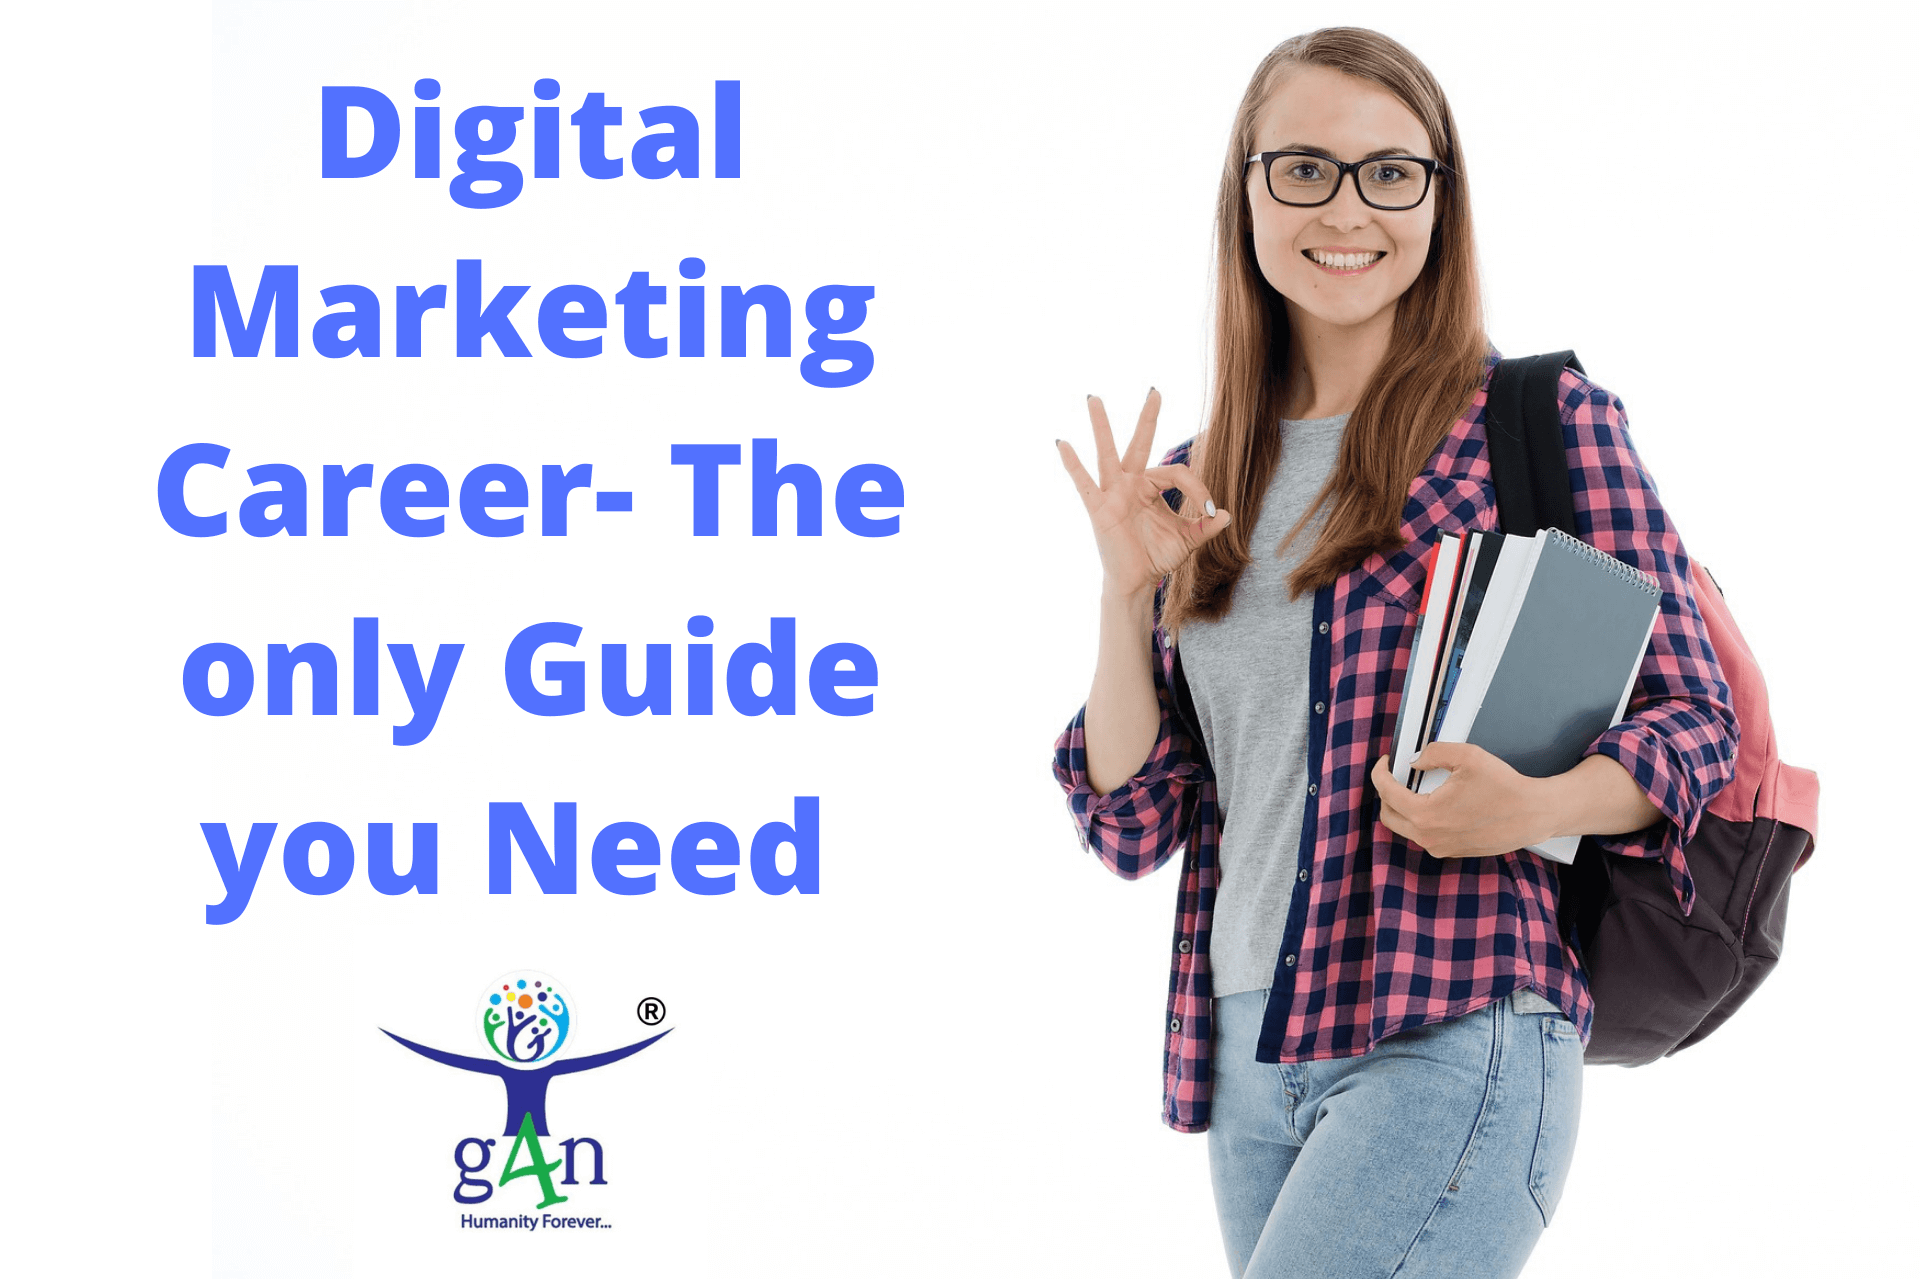 Digital Marketing Career- The only Guide you Need